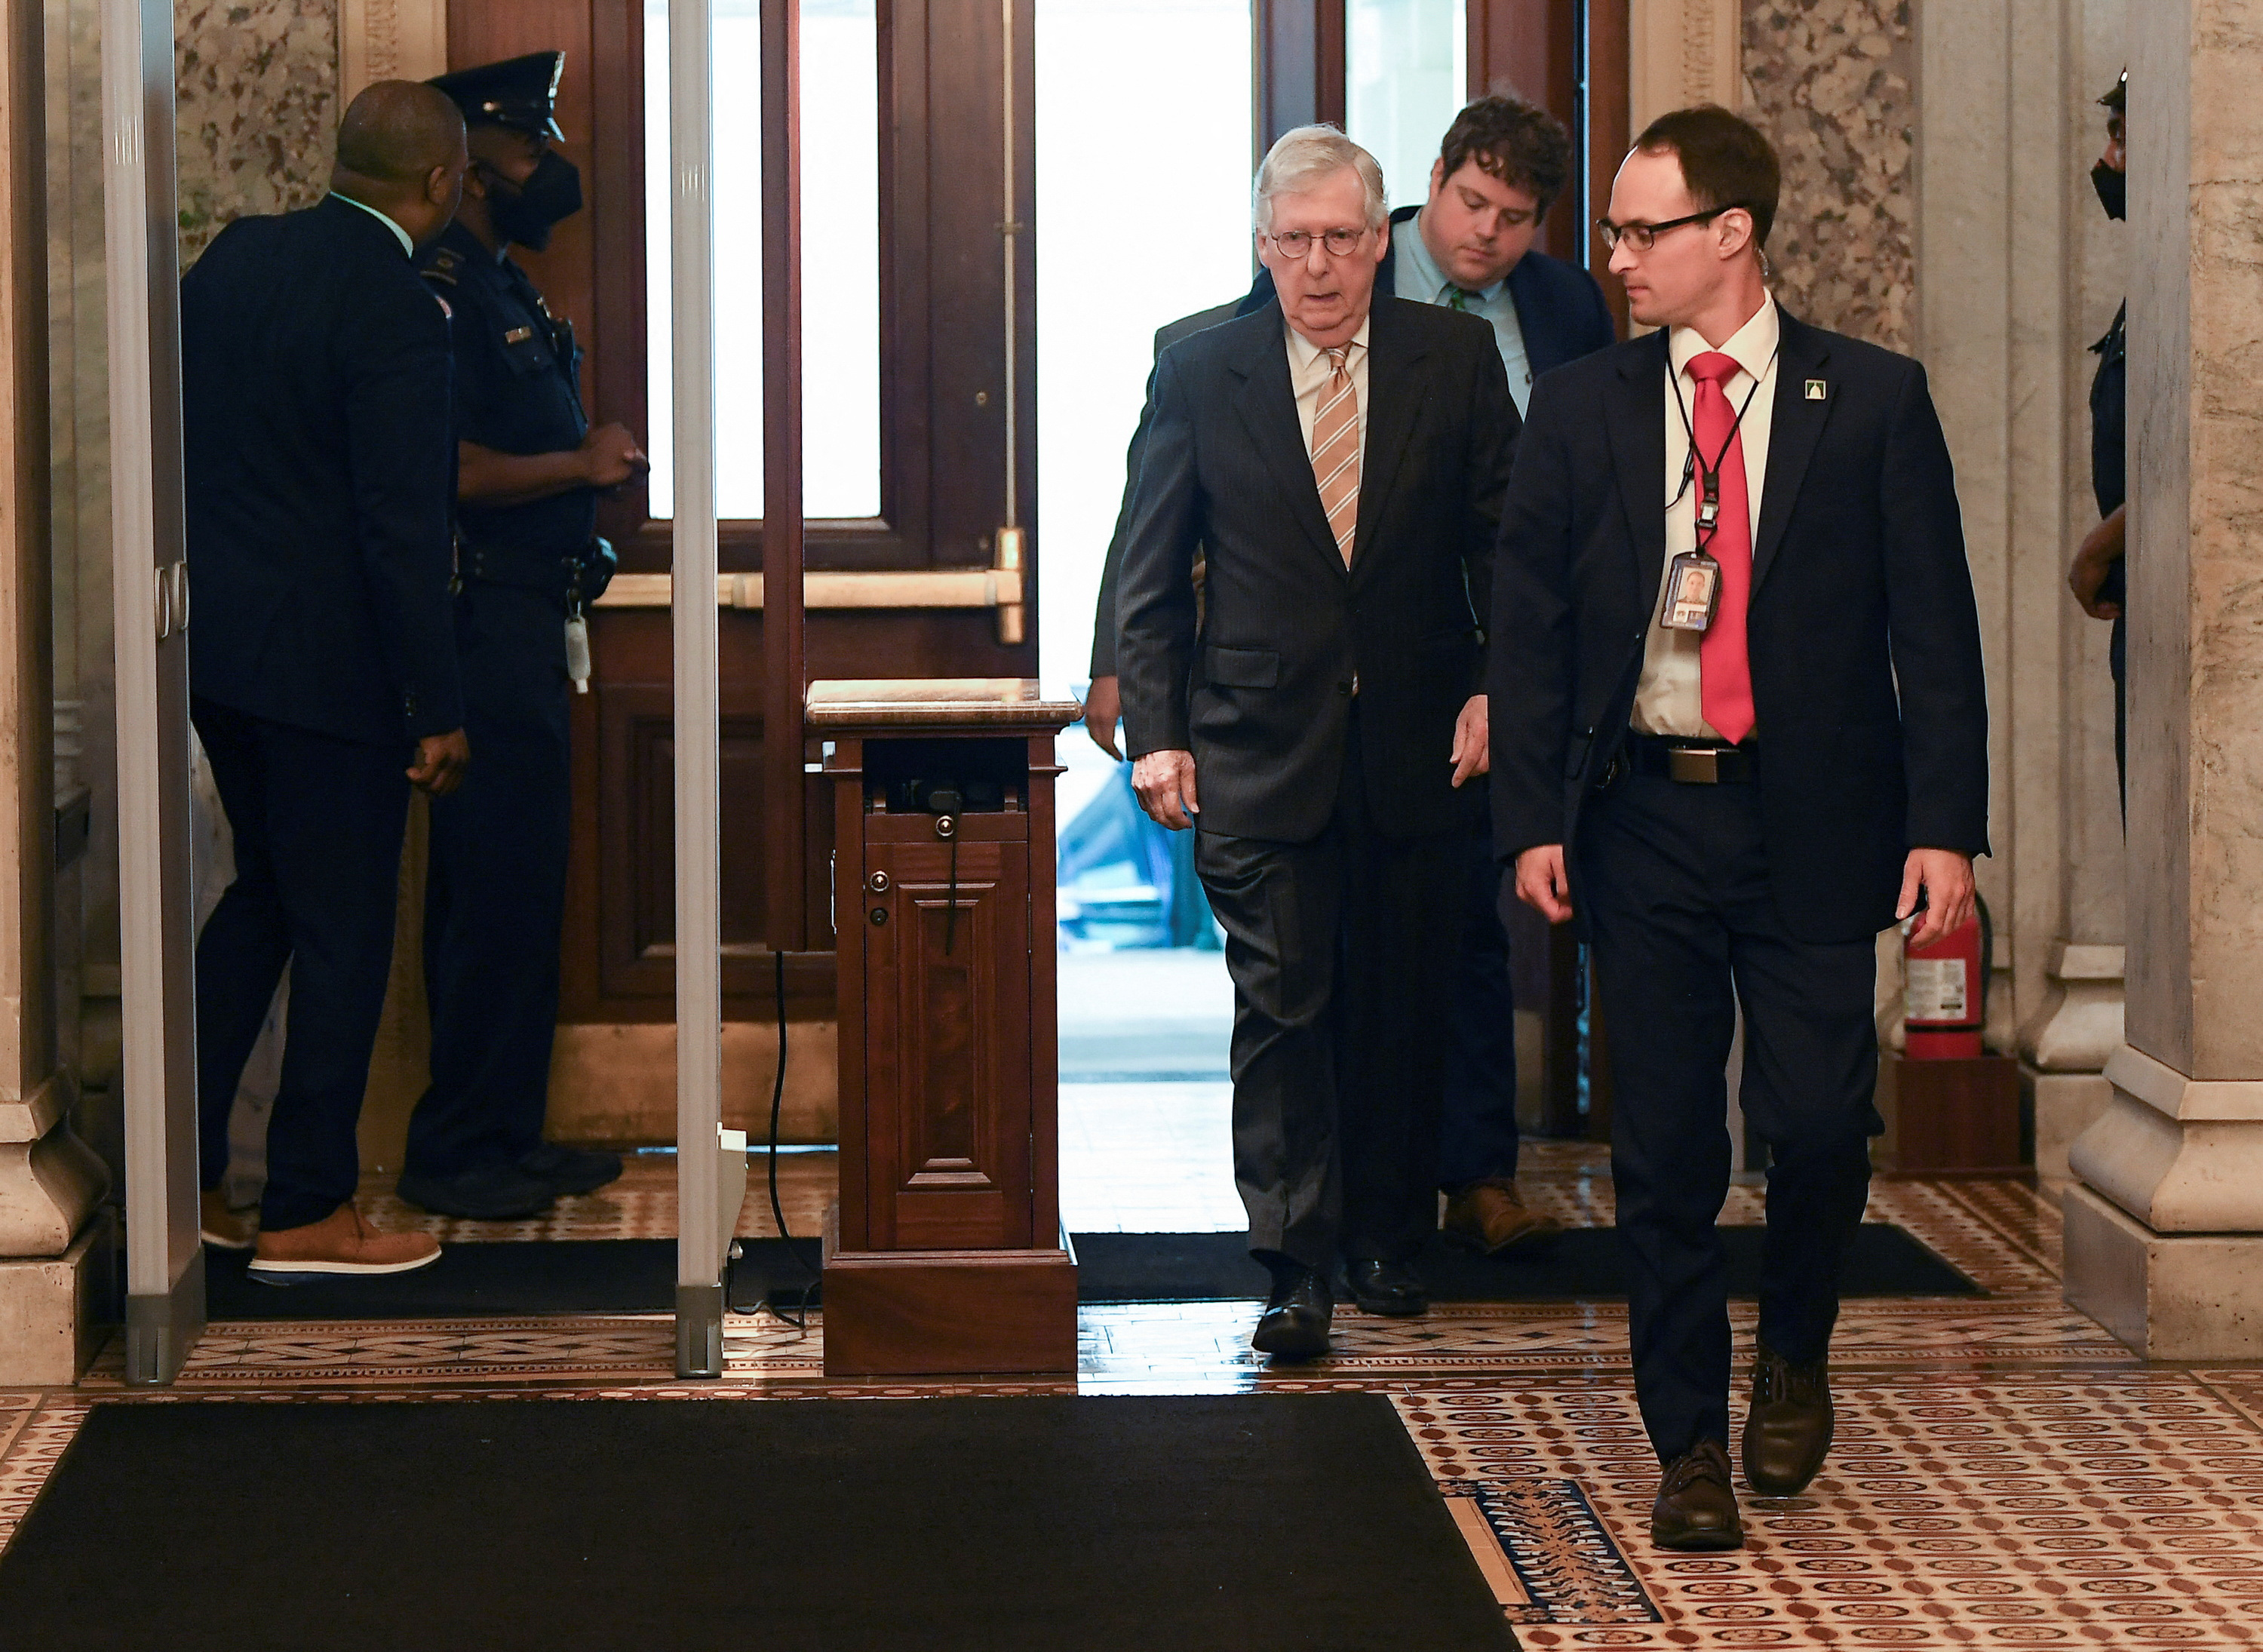 U.S. Senate Minority Leader Mitch McConnell (R-KY) arrives at the U.S. Capitol